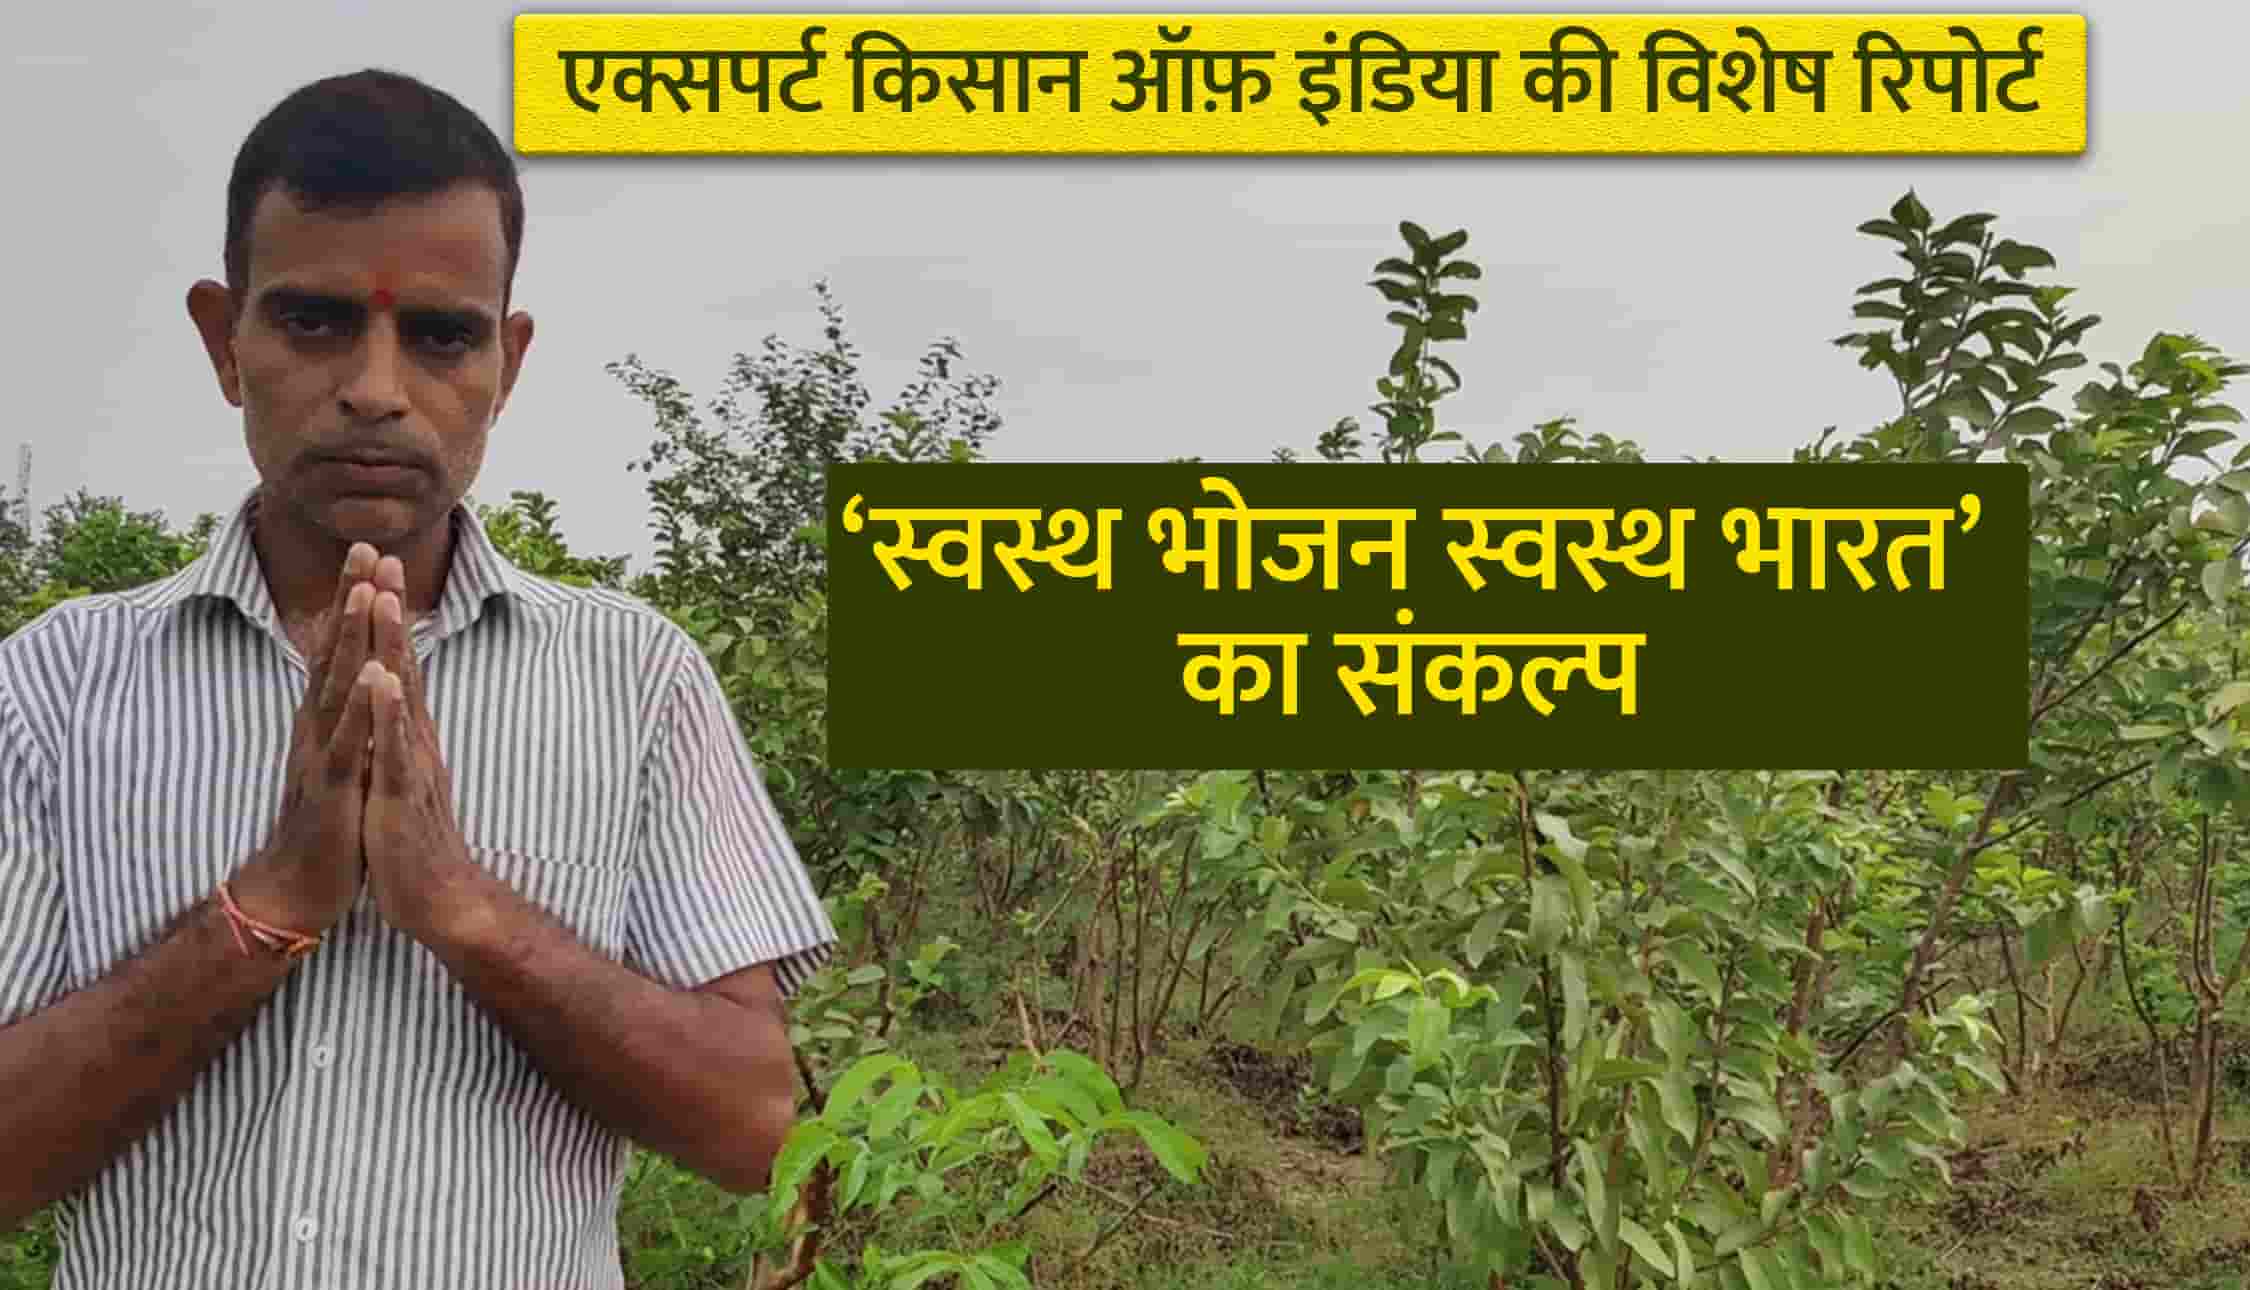 बागवानी फसल (Horticulture Crops)